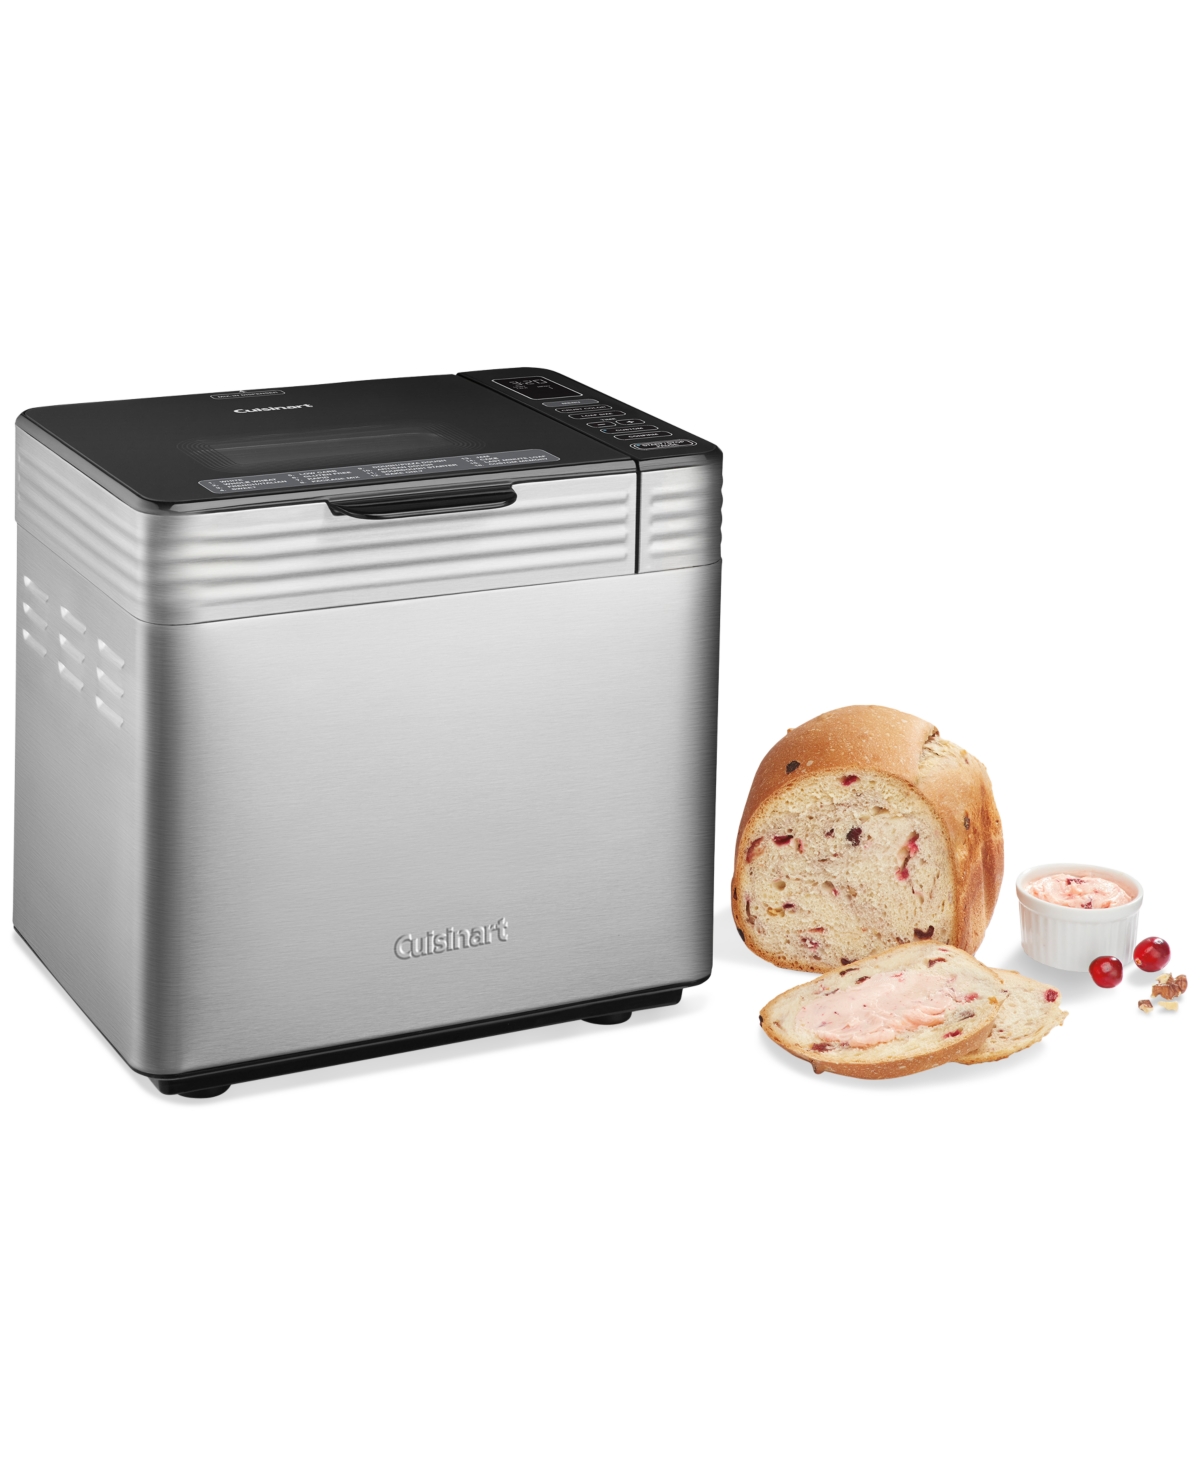 Cuisinart Custom Convection 2 Lb. Loaf Bread Maker In Stainless Steel